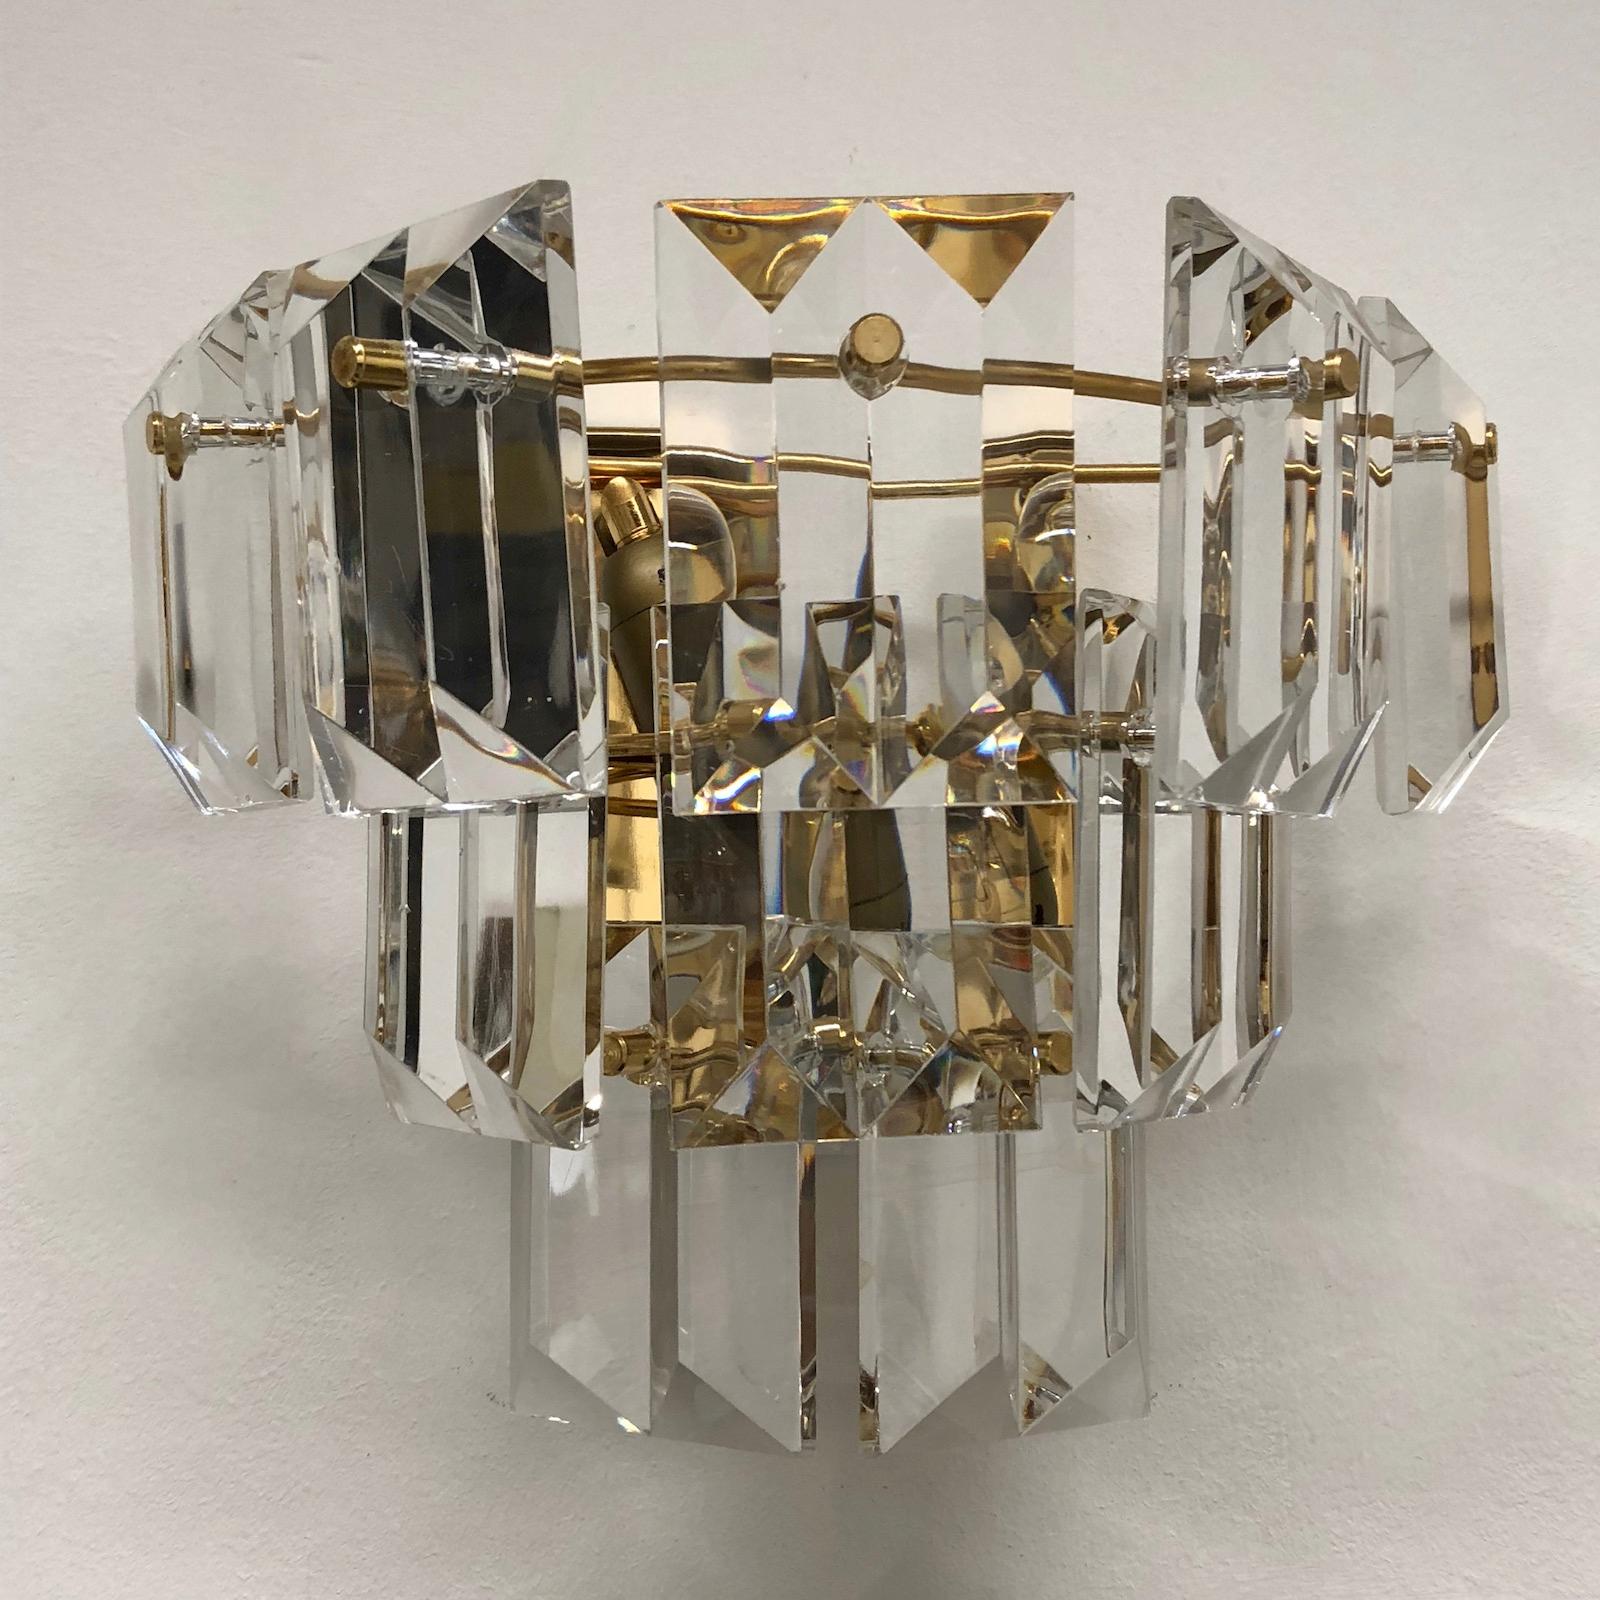 Elegant wall light with crystal glass panels. It's made of gold-plated metal and glass. This fixture requires two European E14 candelabra bulbs, up to 40 watts each. A view little chips or flea-bits on the backside of the glass, also little bended